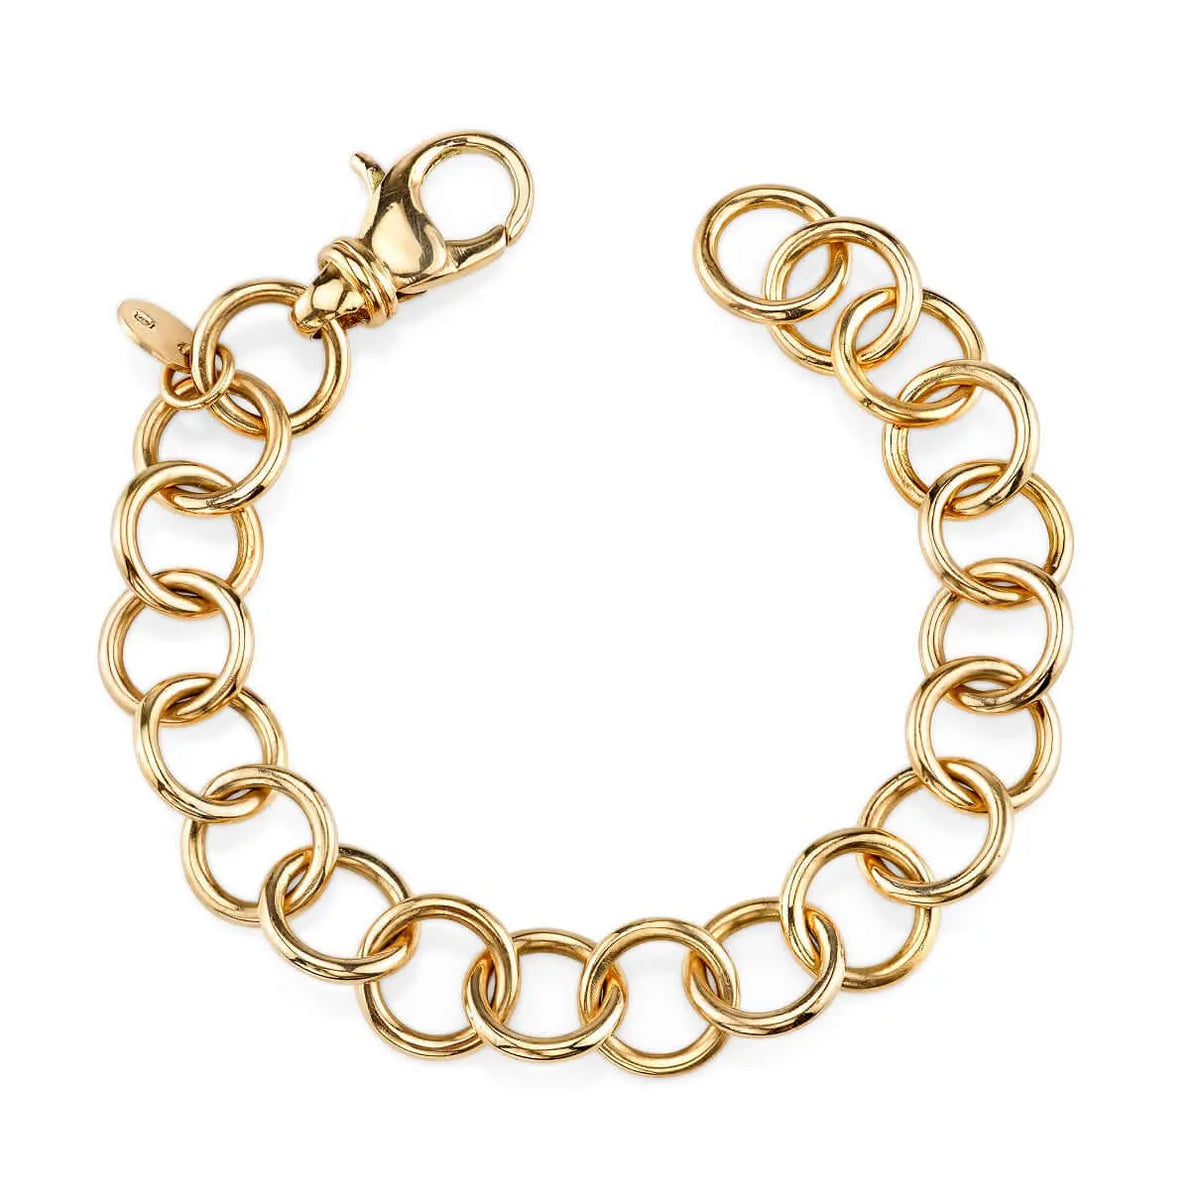 Single stone is handcrafted in LA. The club bracelet is 18k yellow gold round links. The bracelet measures 7.5 inches.